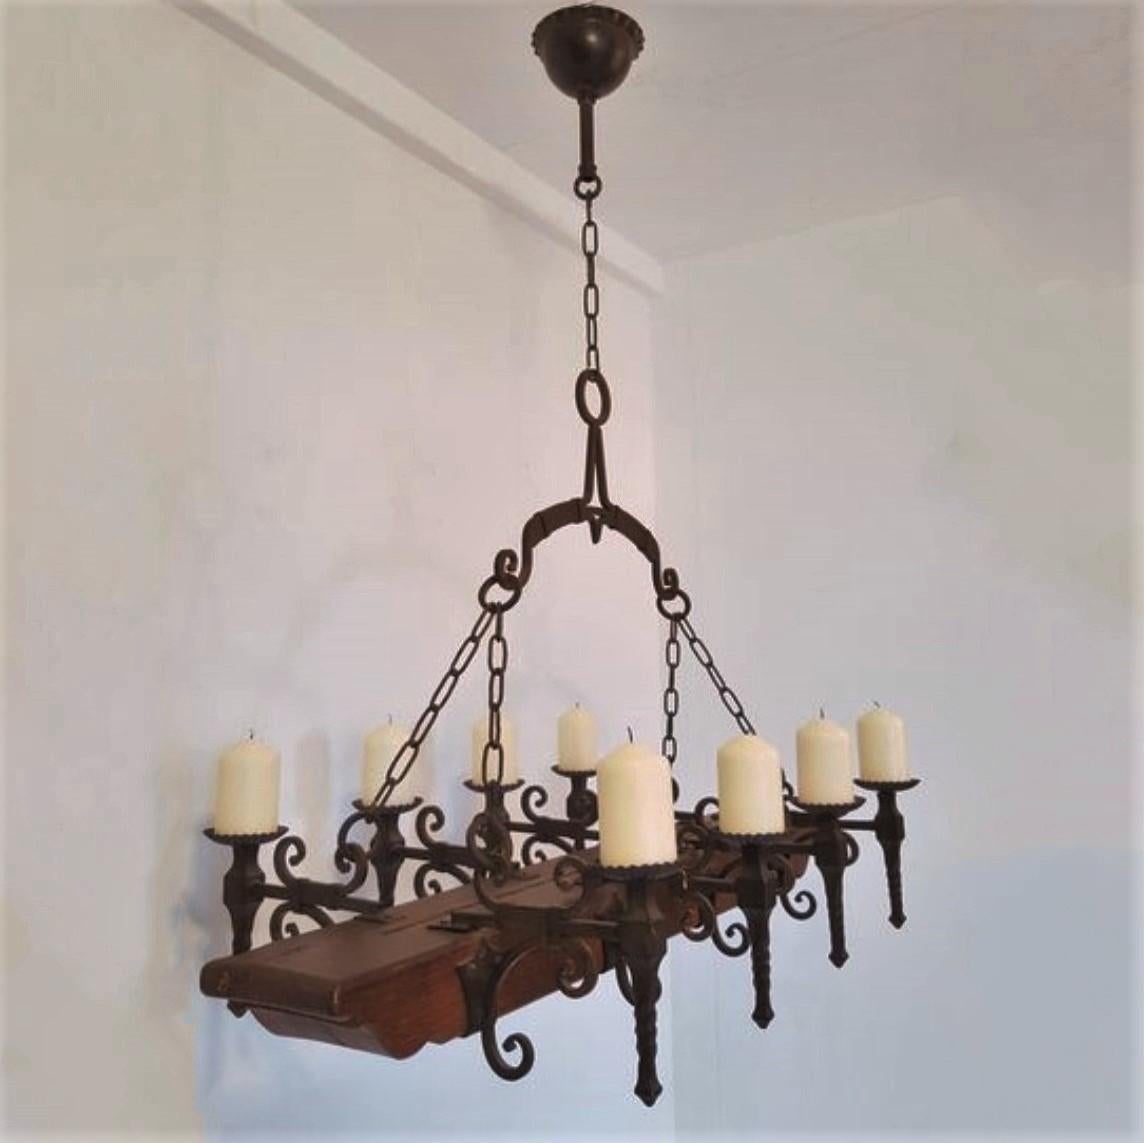 Unique handcrafted forged wrought iron and oak castle candle chandelier, Spain, mid-19th century.
Wrought Iron beautifully forged in Medieval style, 8 candle holders on a rubust hand-carved oak horizontal piece. 
A great eye-catcher above a long